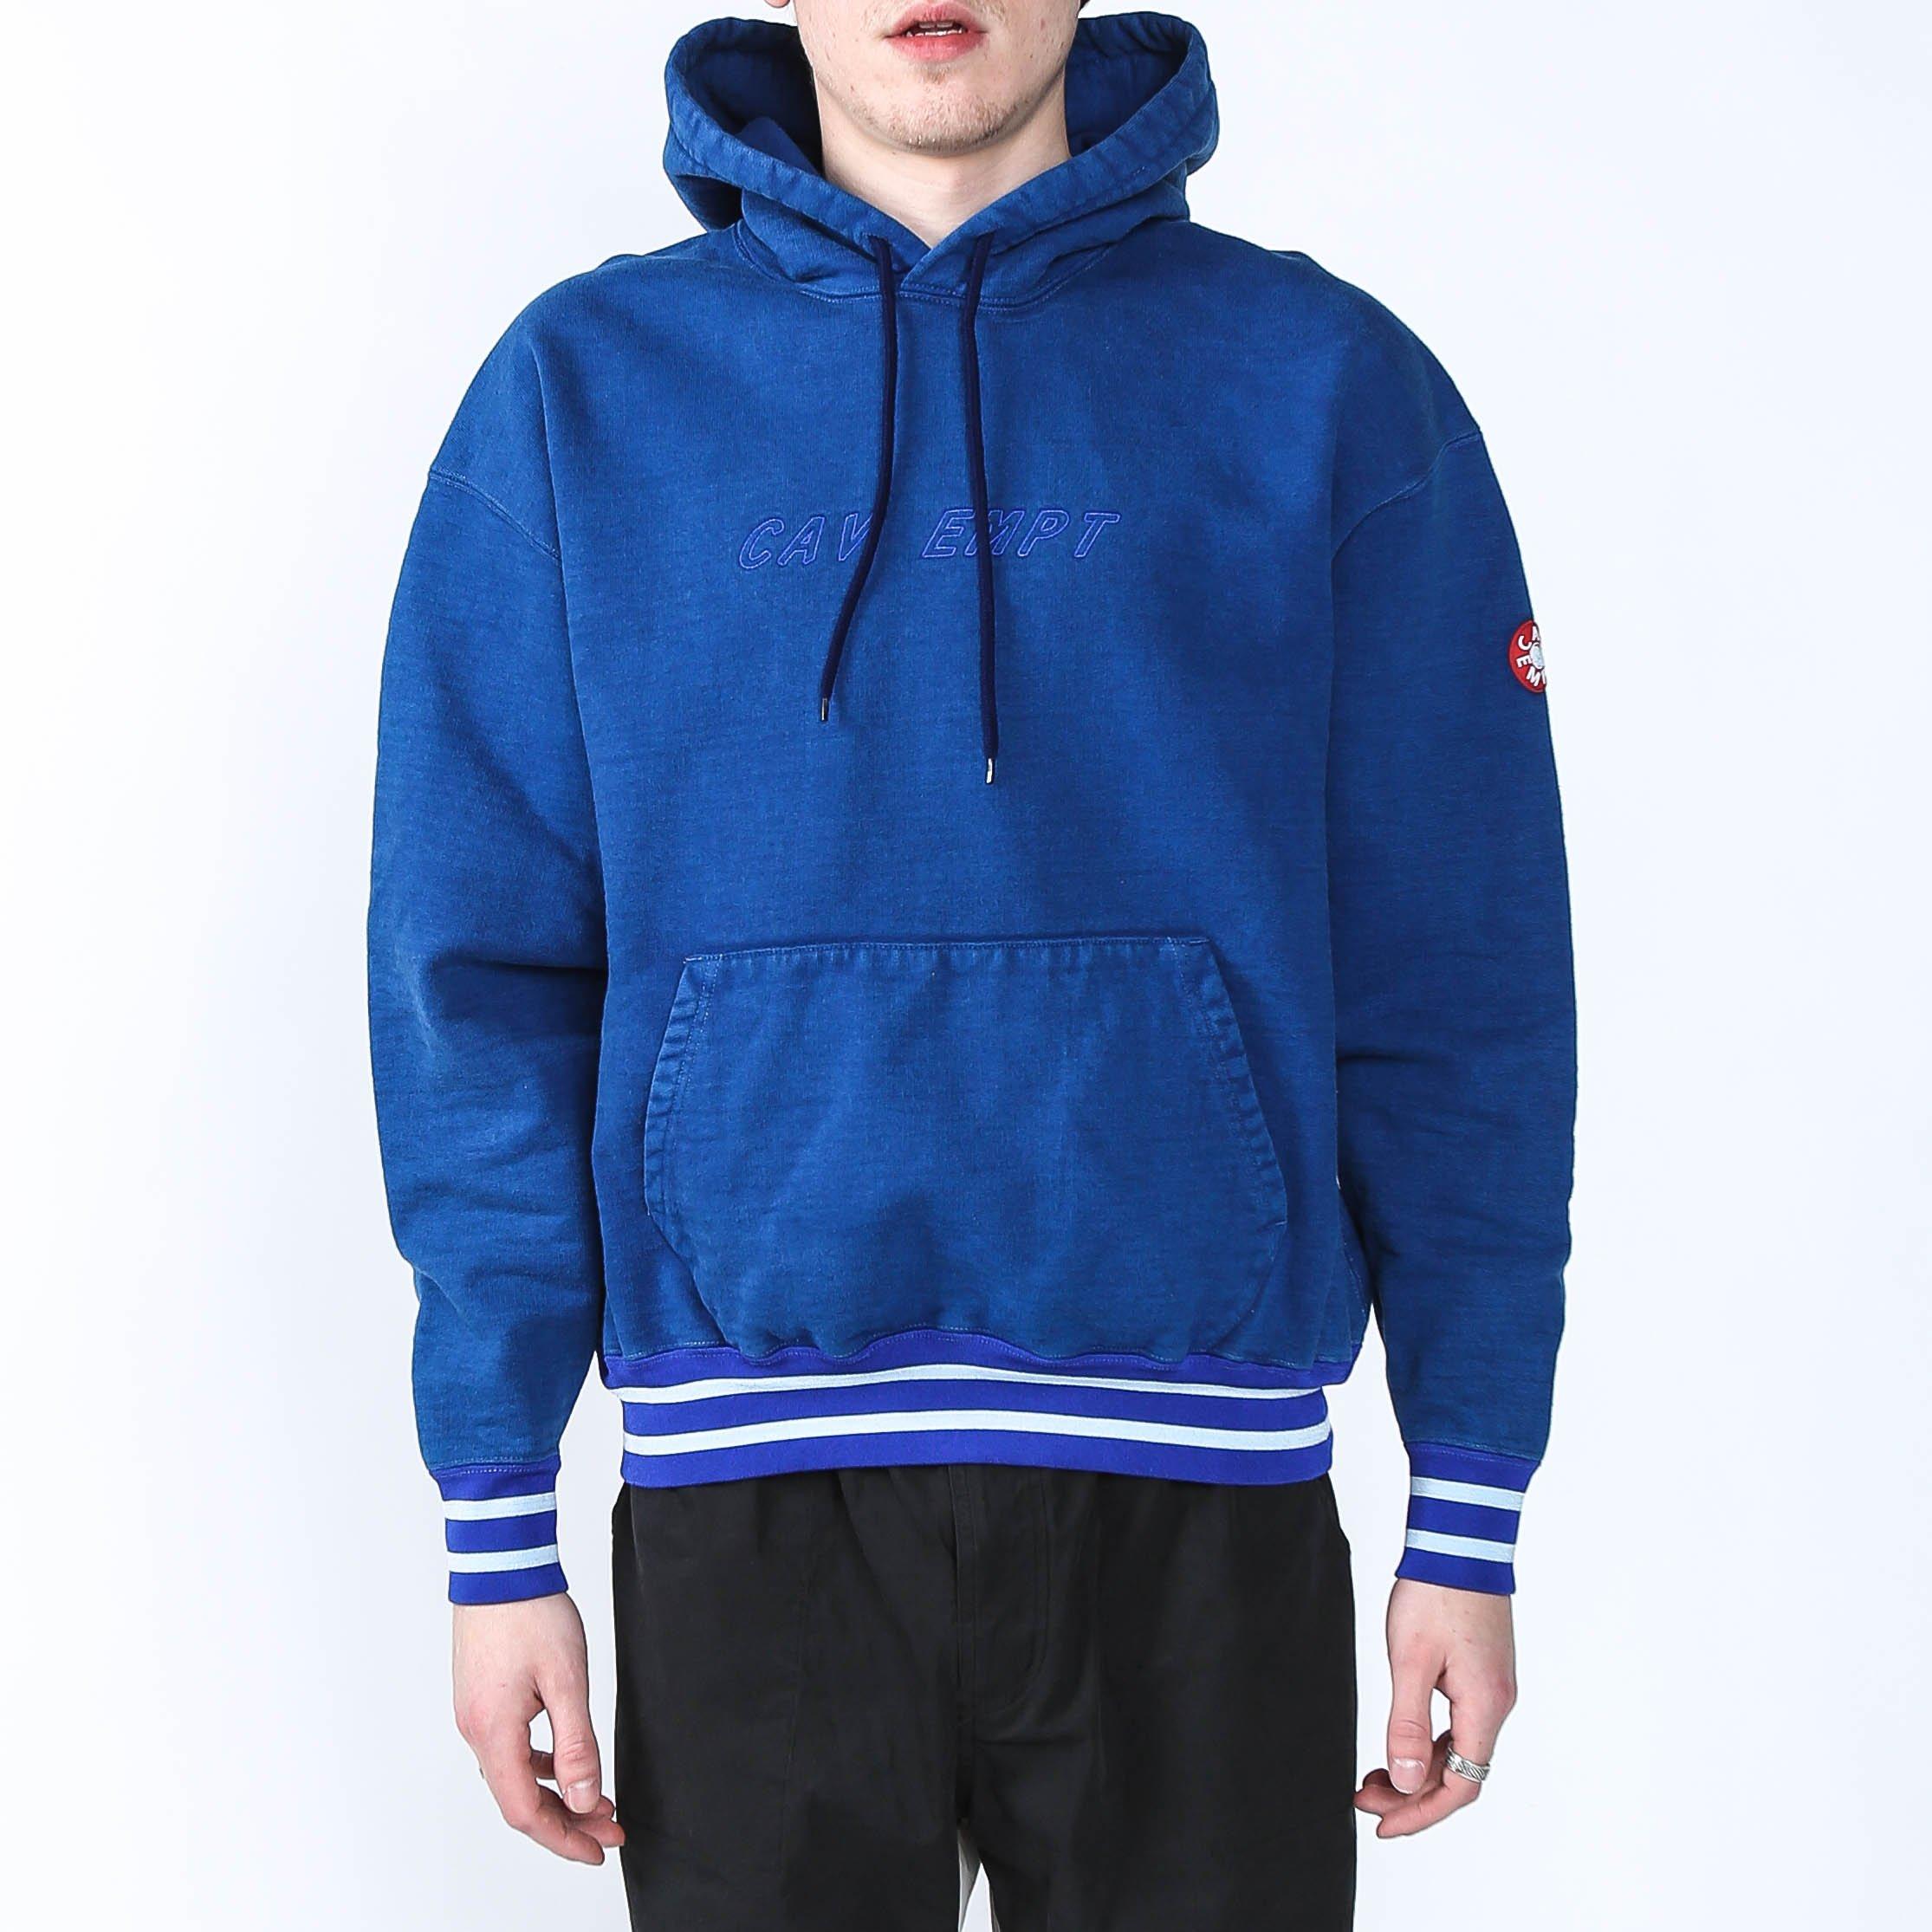 Cav Empt Rubber Poly Rib Heavy Hoodie in Blue for Men - Lyst